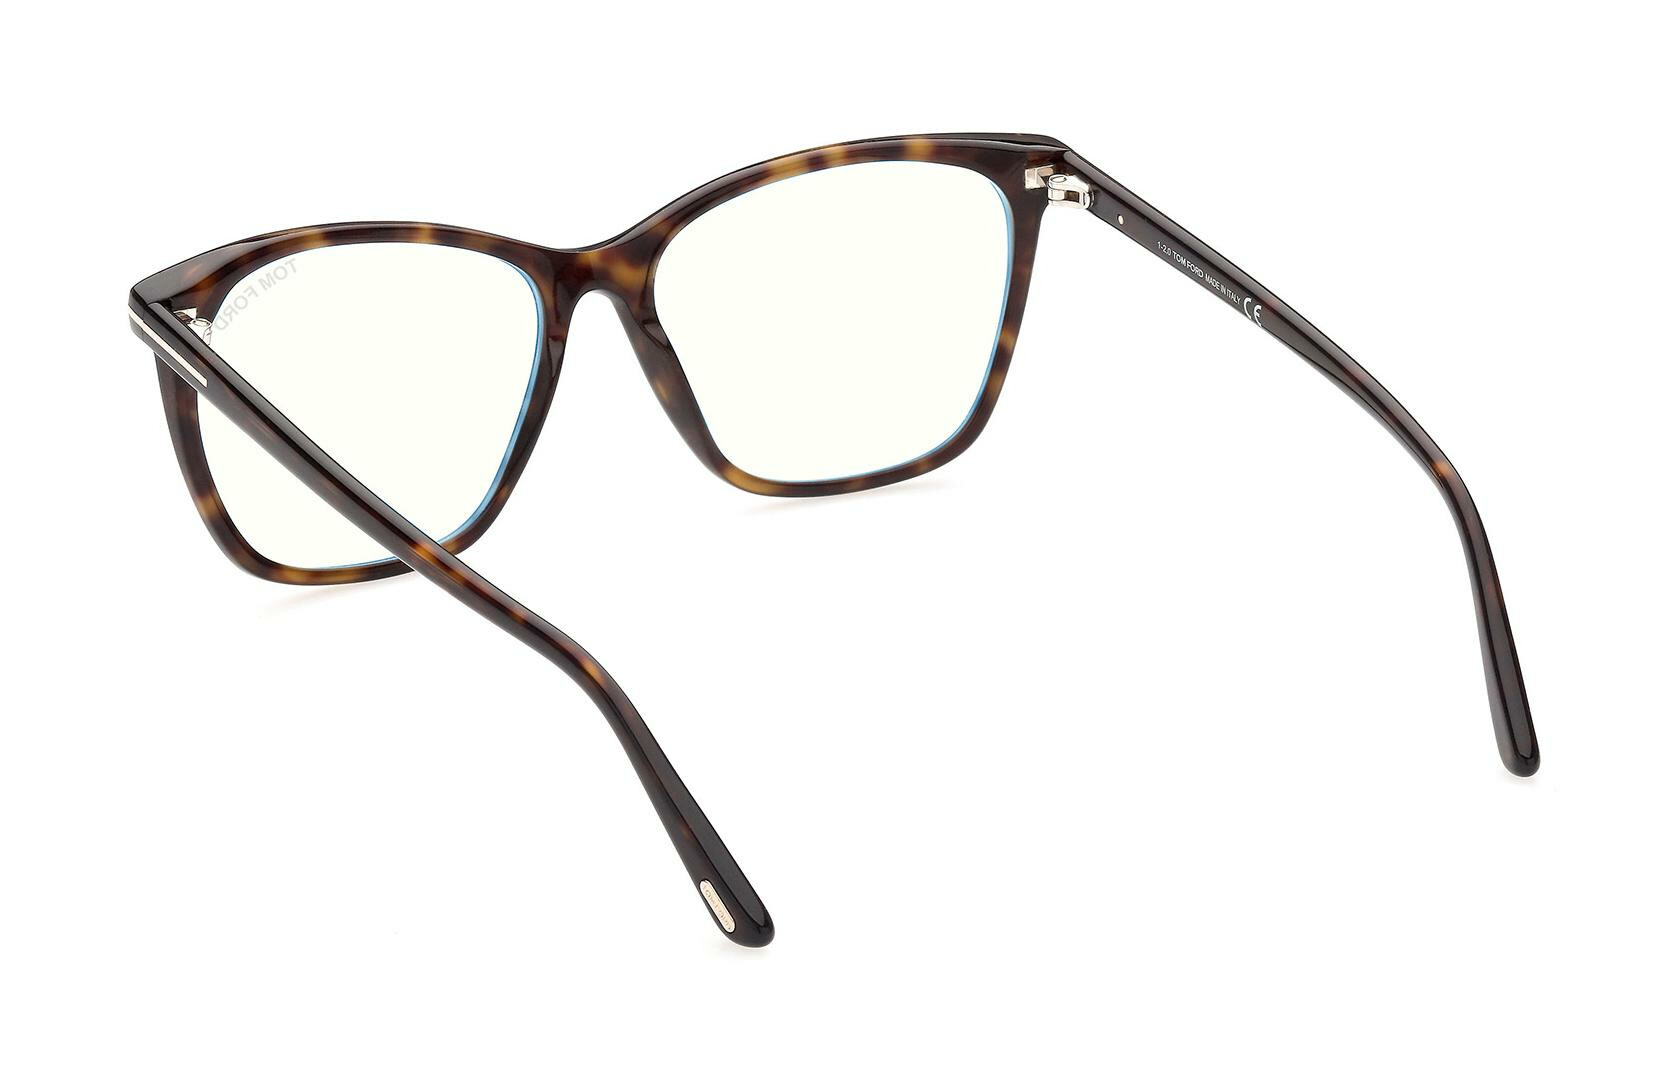 Angle_Right01 Tom Ford FT5762-B 052 Brille Havana